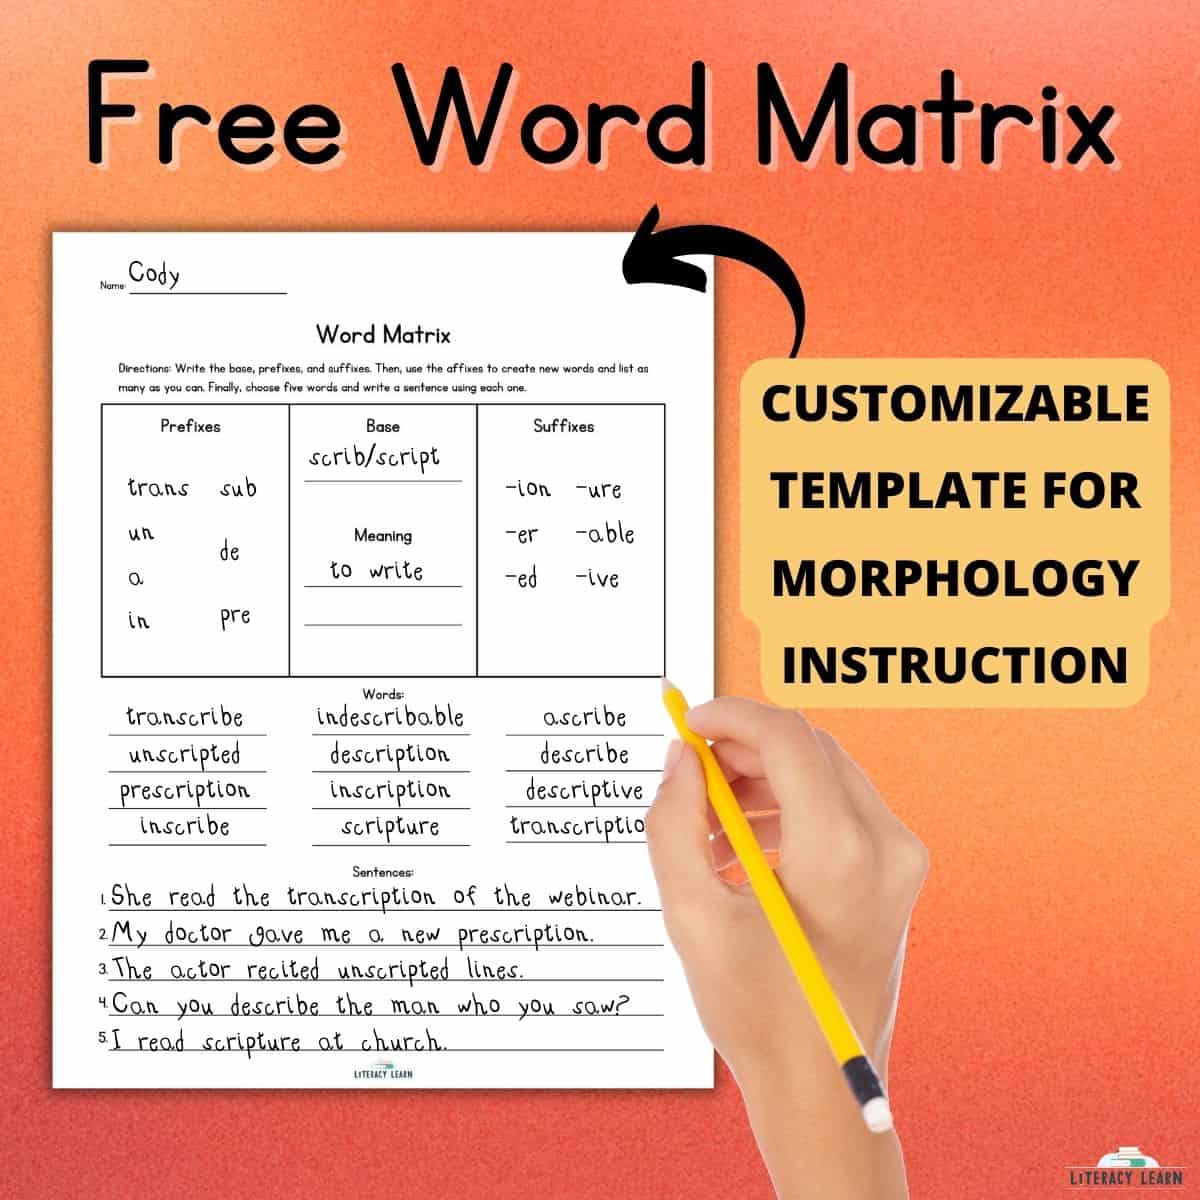 Orange graphic entitled "Free Word Matrix" with customizable template for morphology instruction.